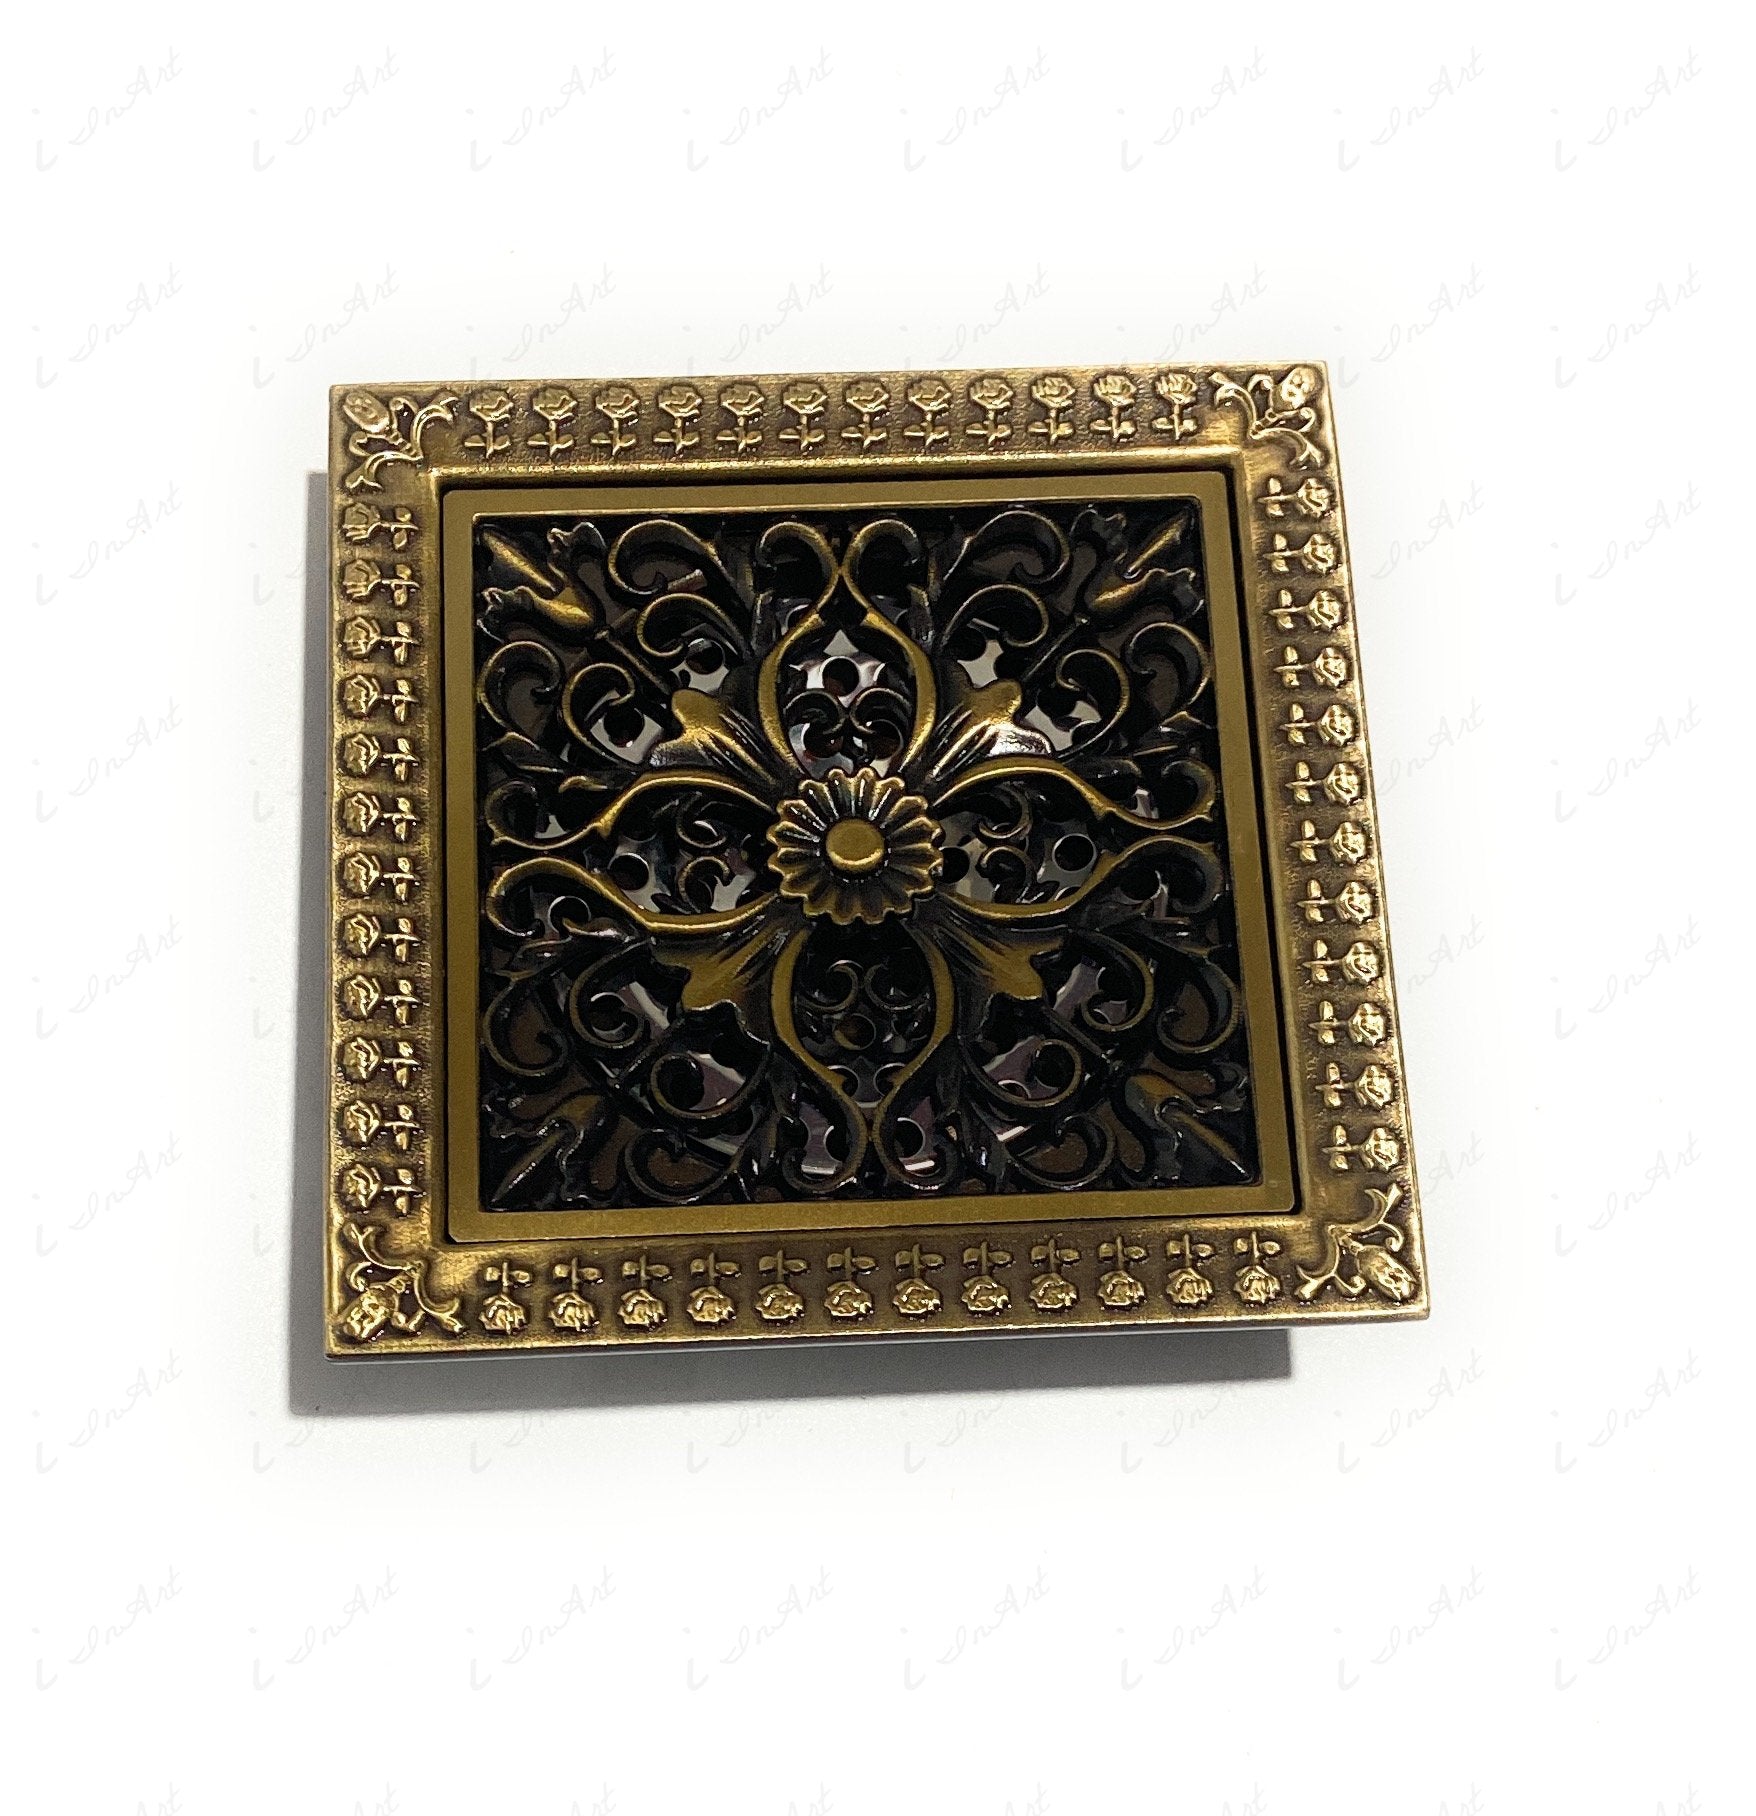 InArt Brass Square Shower Floor Drain with Removable Cover Grid Grate 5 inch Long Antique Finish Floral - InArt-Studio-USA